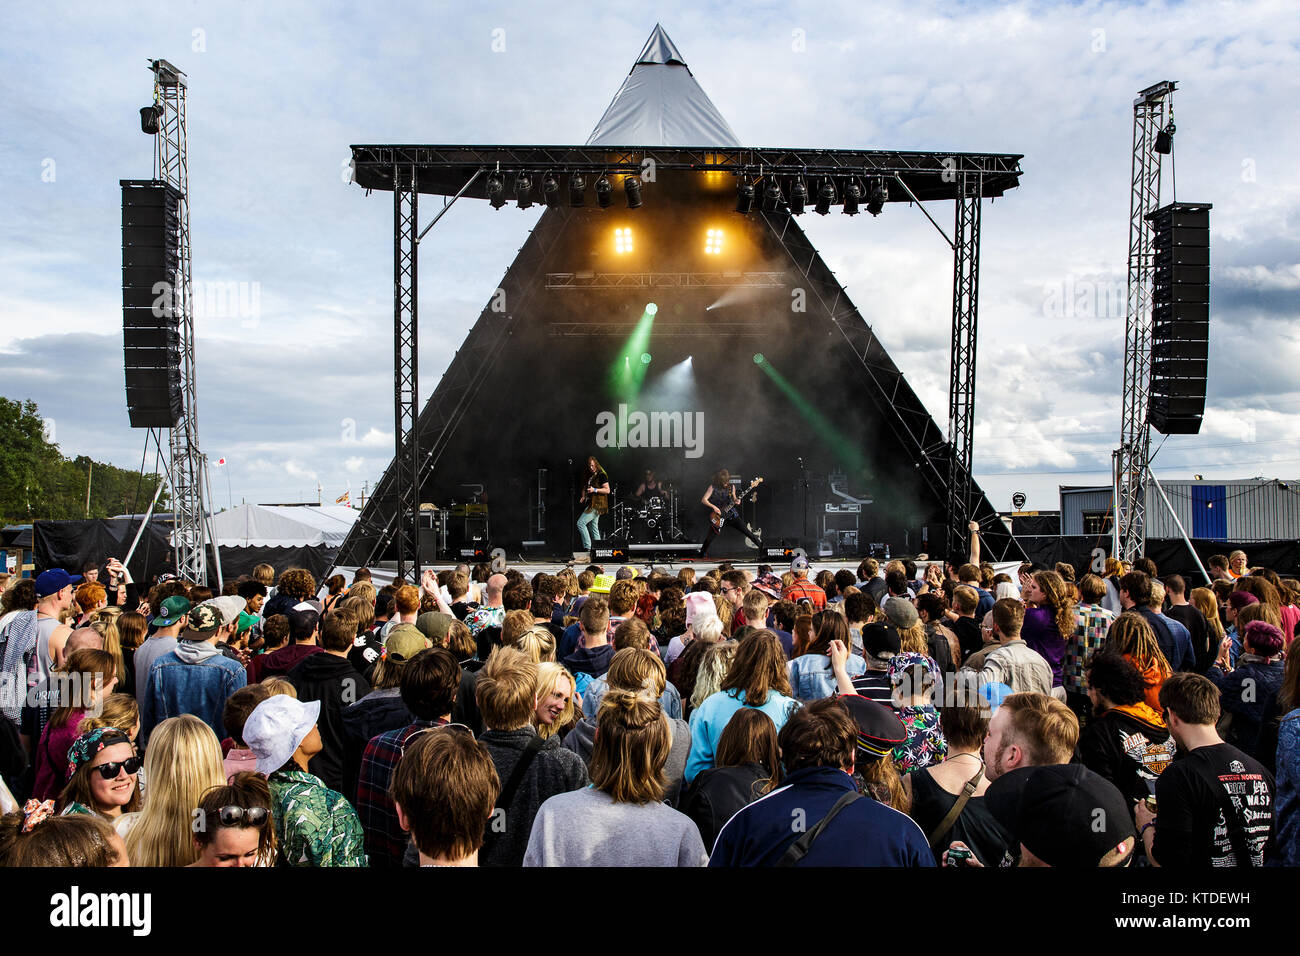 The Icelandic rock band The Vintage Caravan performs a live concert at the Danish music festival Roskilde Festival 2015. Denmark, 28/06 2015. Stock Photo